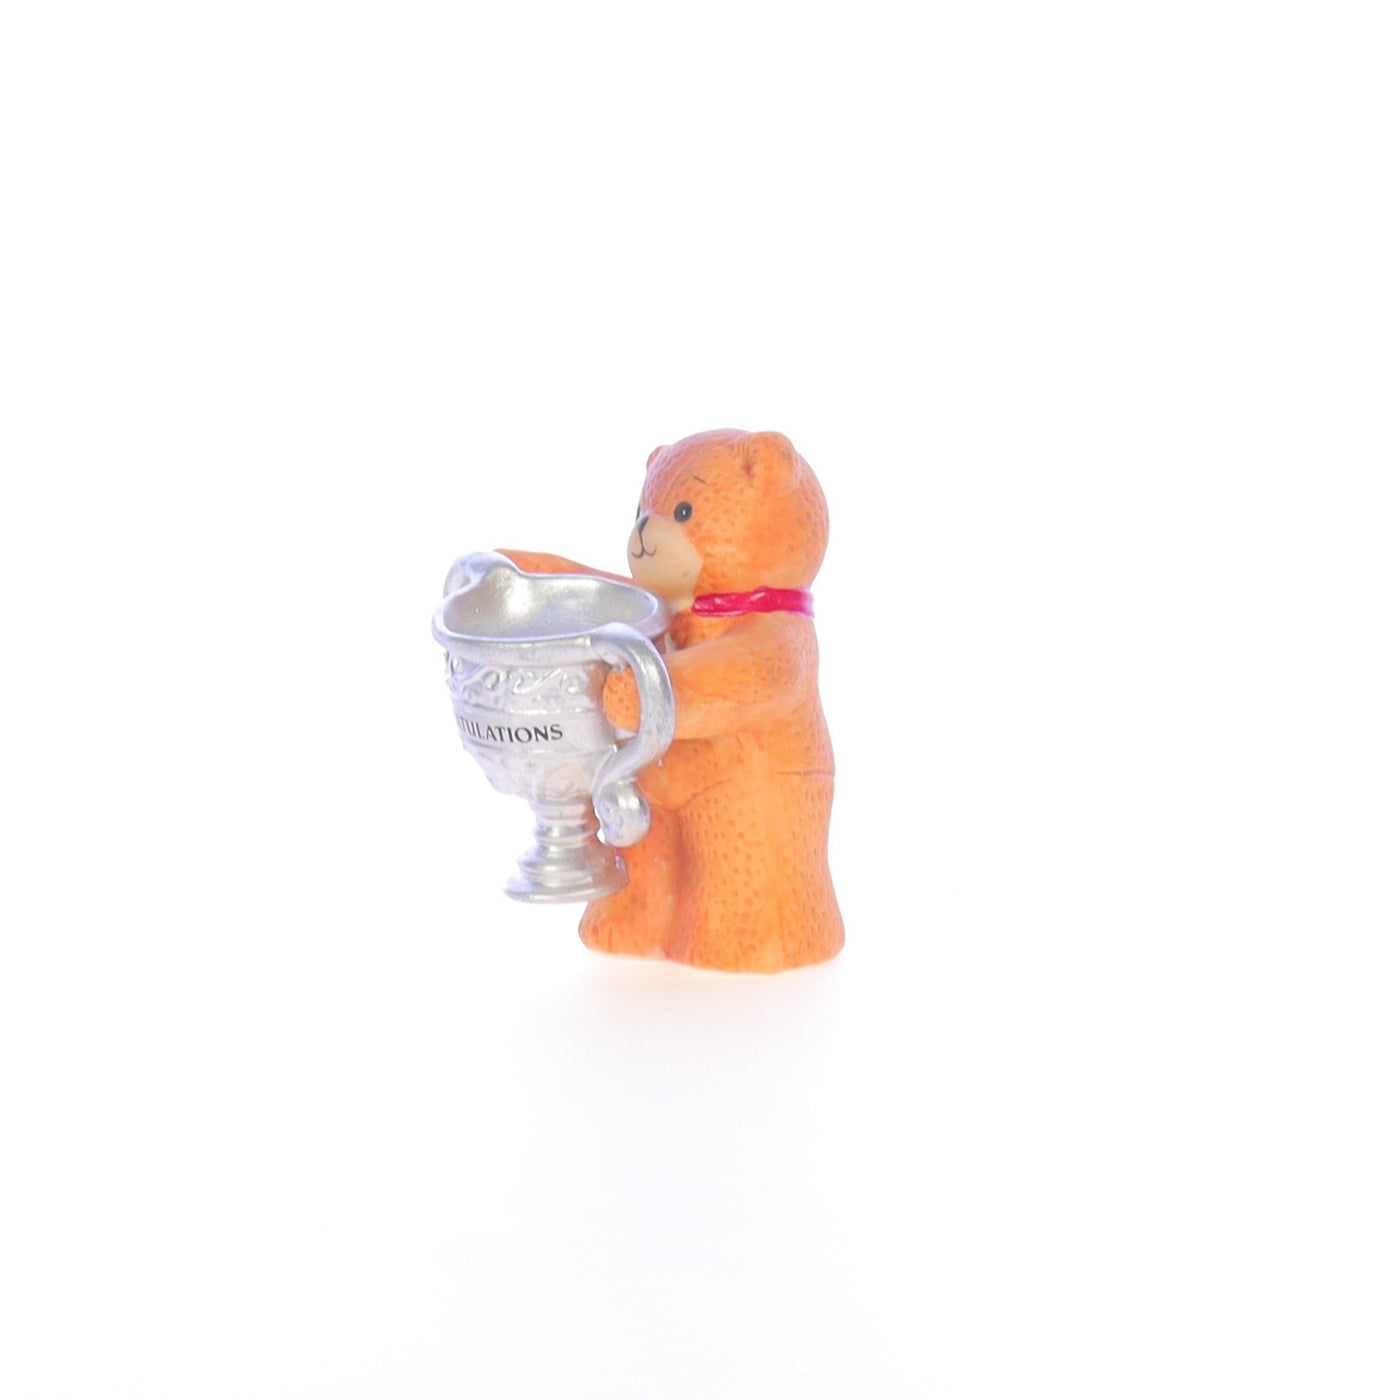 Lucy_And_Me_by_Lucy_Atwell_Porcelain_Figurine_Bear_with_Congraulations_Trophy_Cup_Lucy_Unknown_048_02